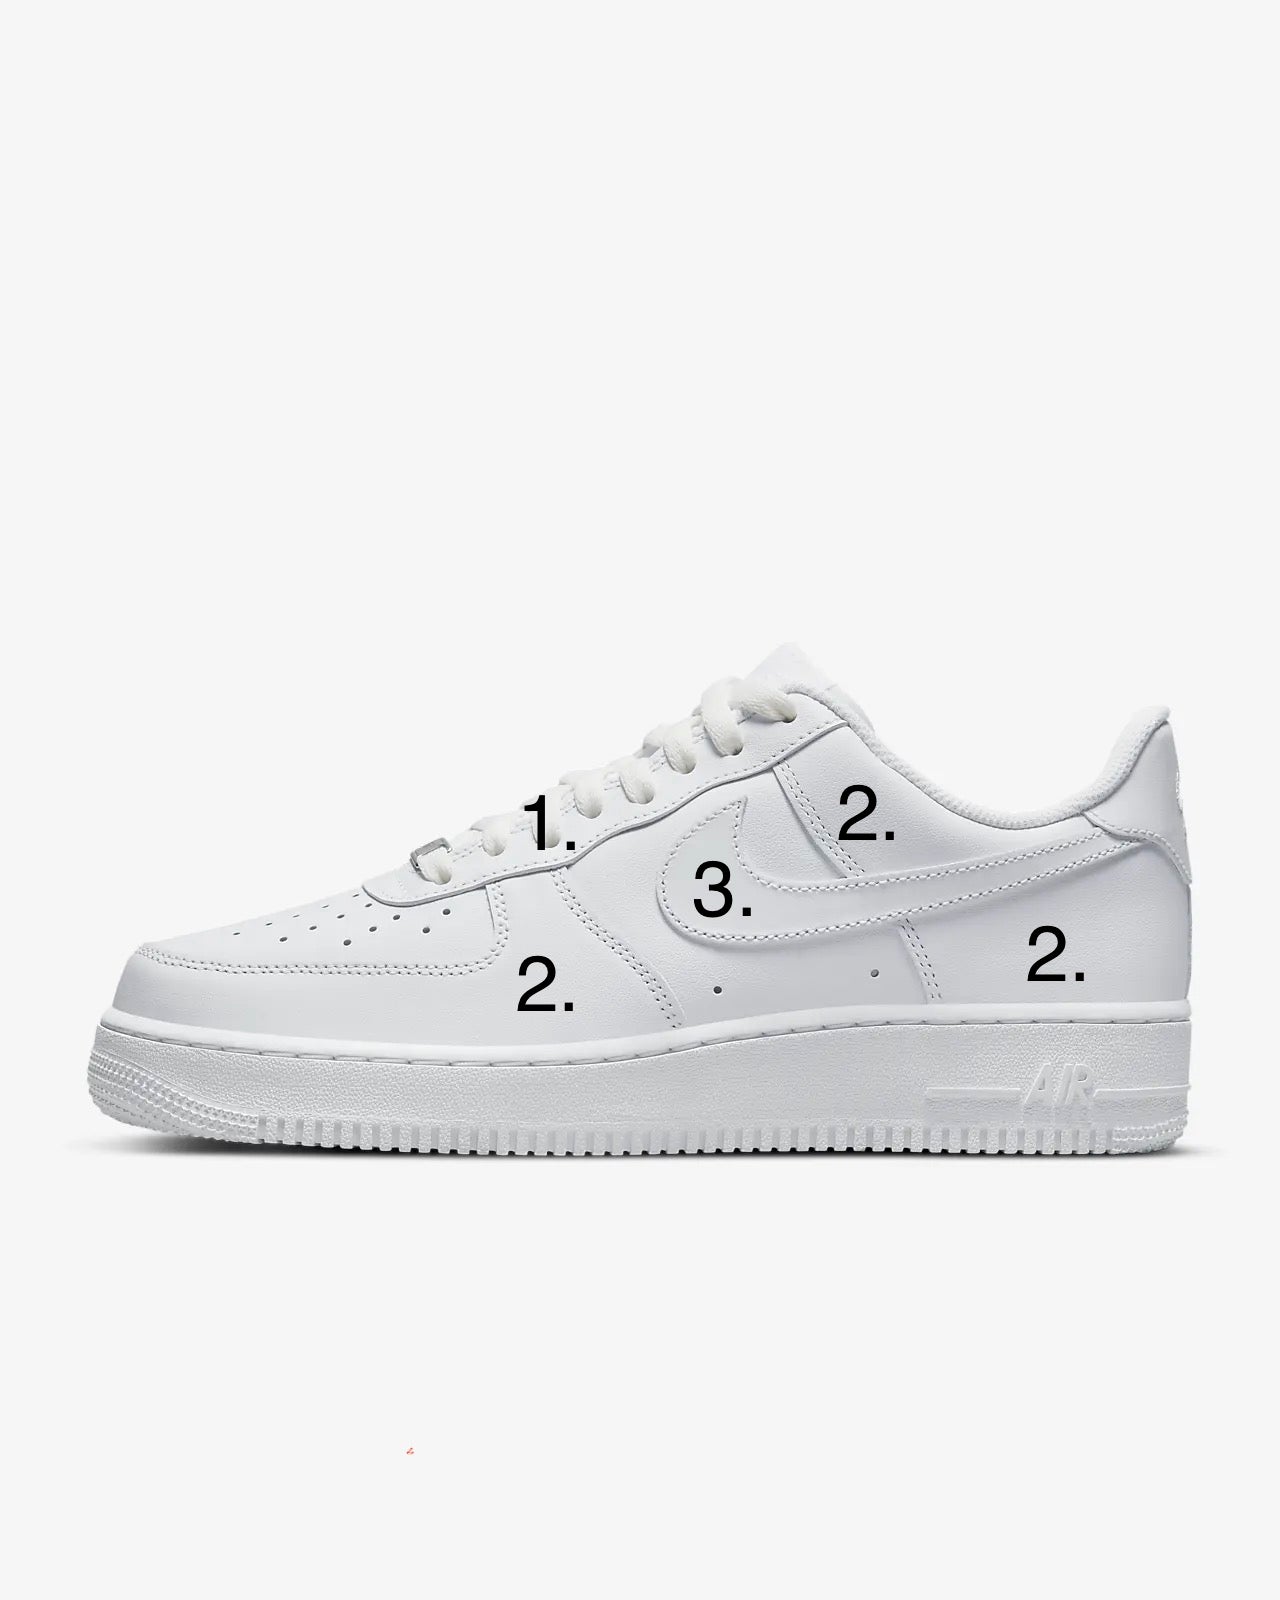 Nike AF1 - 3 Tone Colourway (Create Your Own) *Junior*